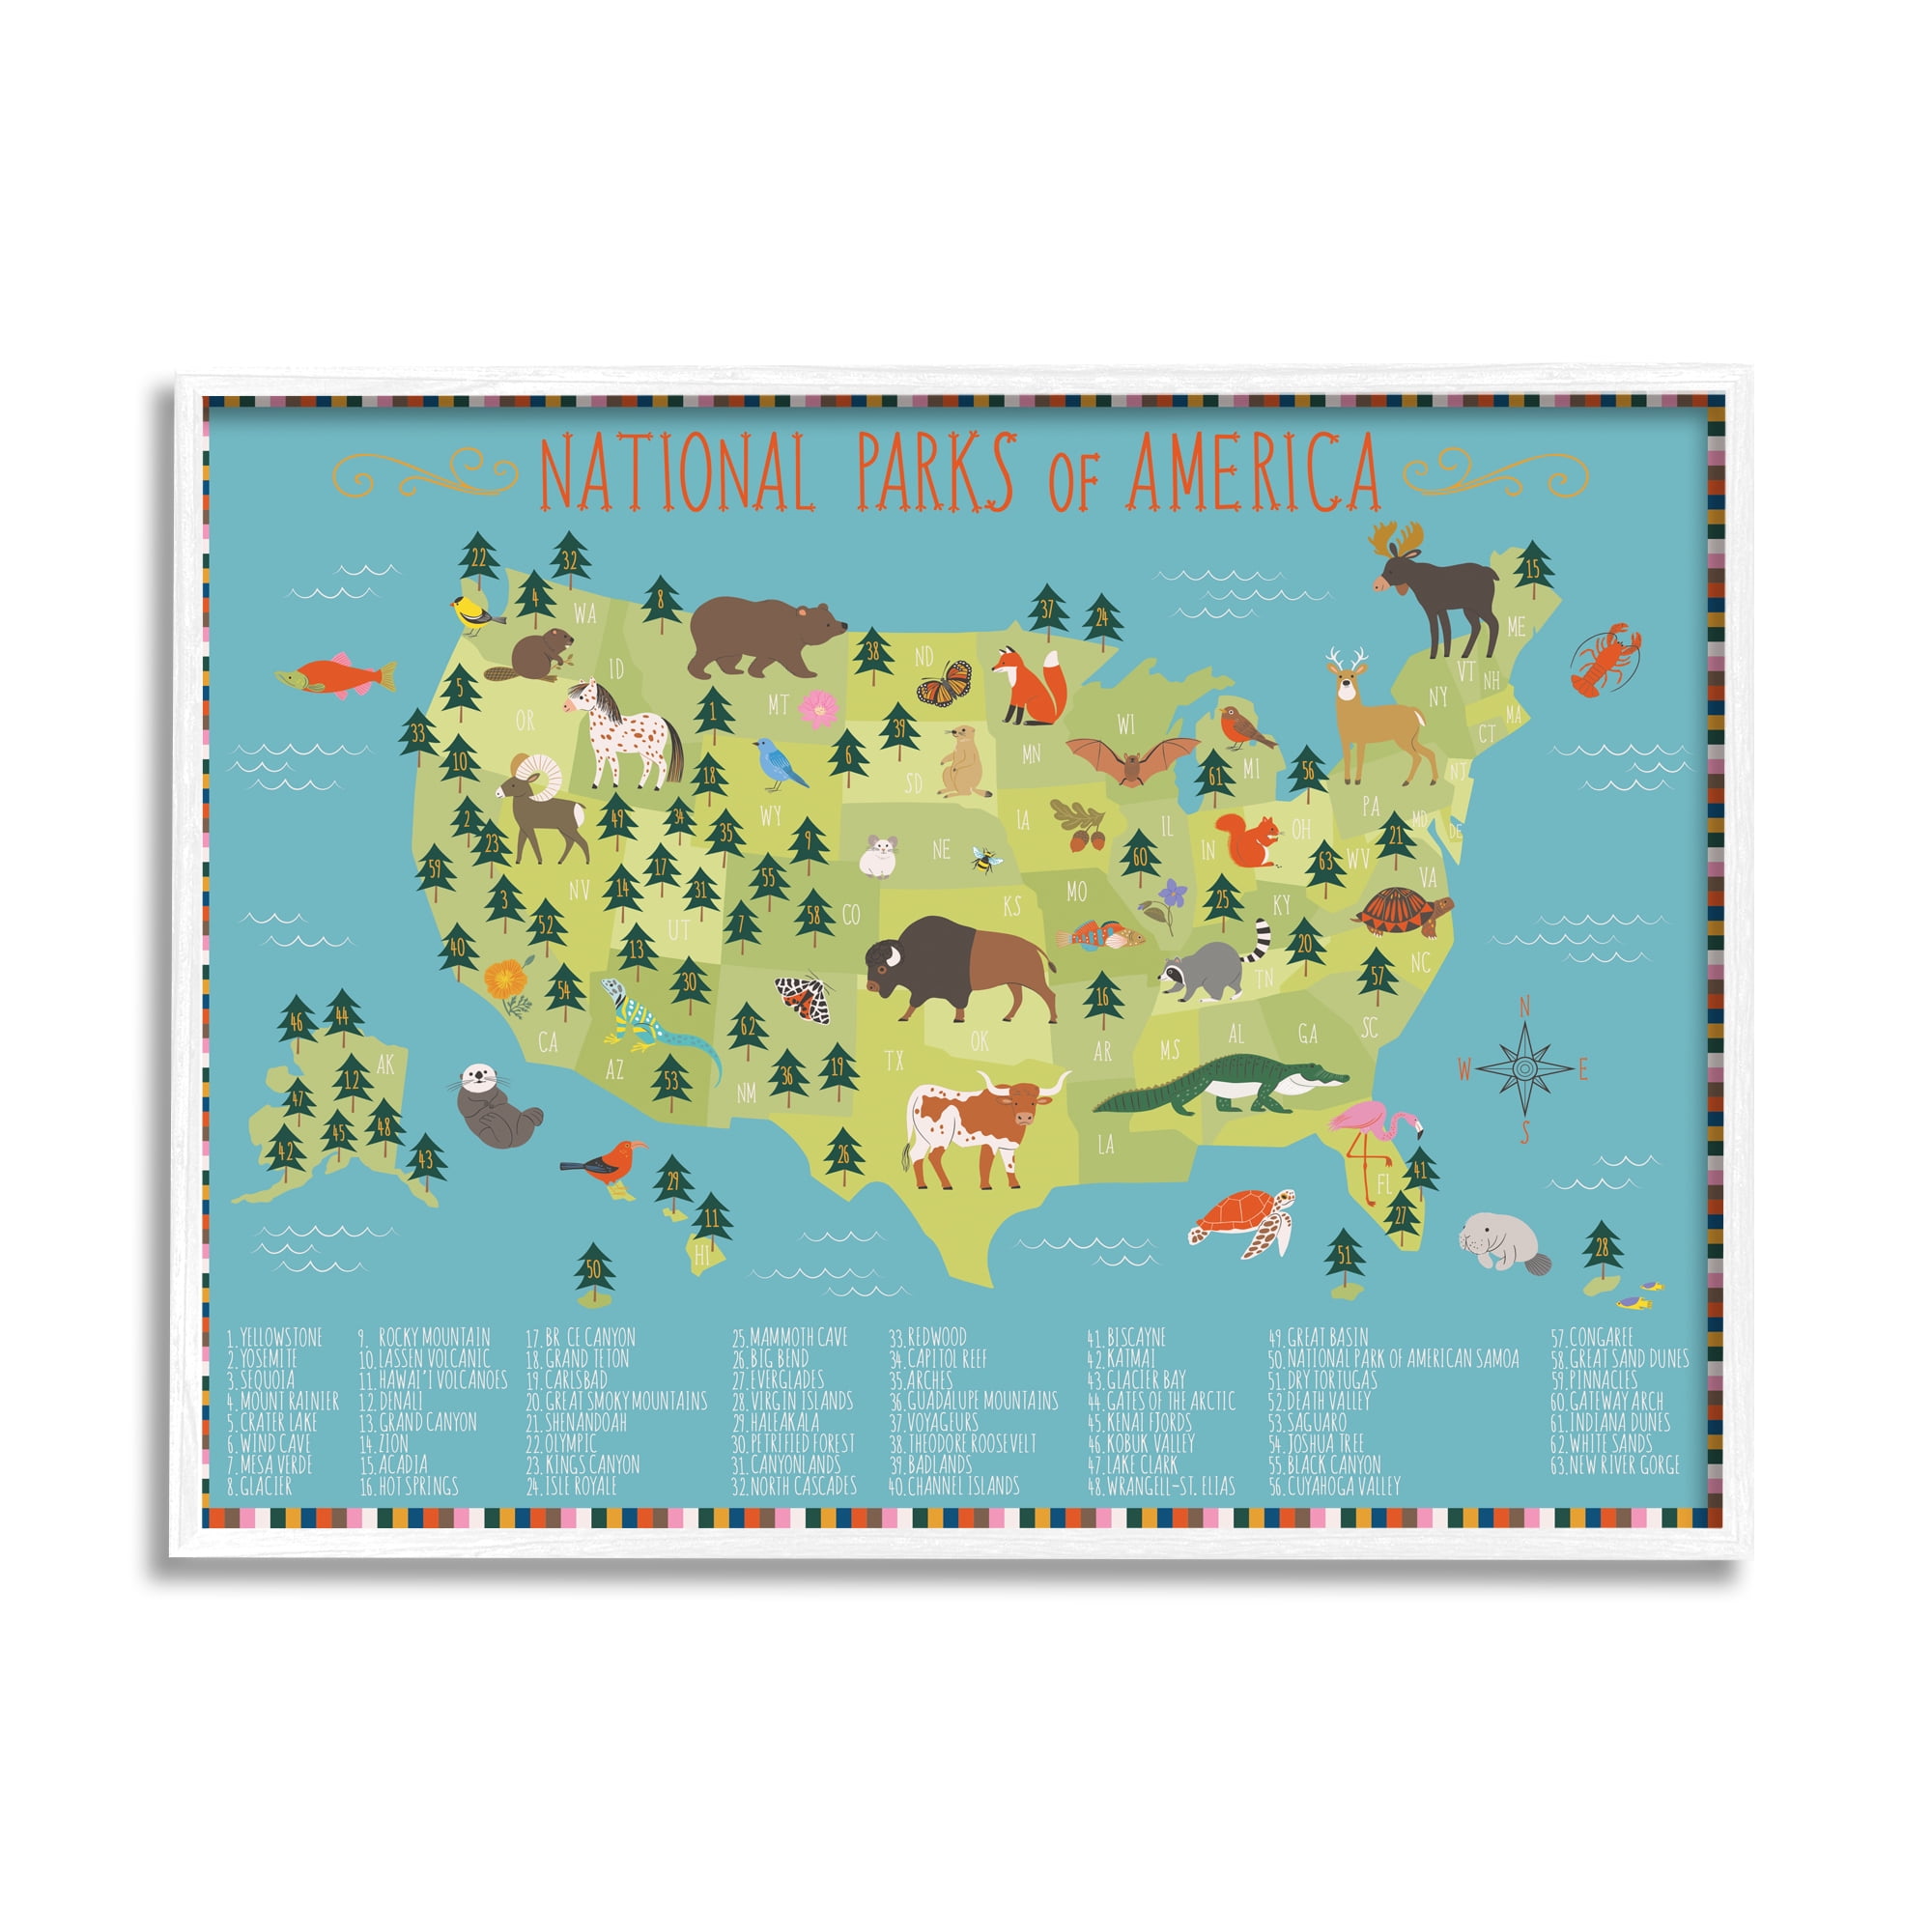 Kids World Map Coloring Poster - 35 x 52 Inch Giant Coloring Poster for Kids